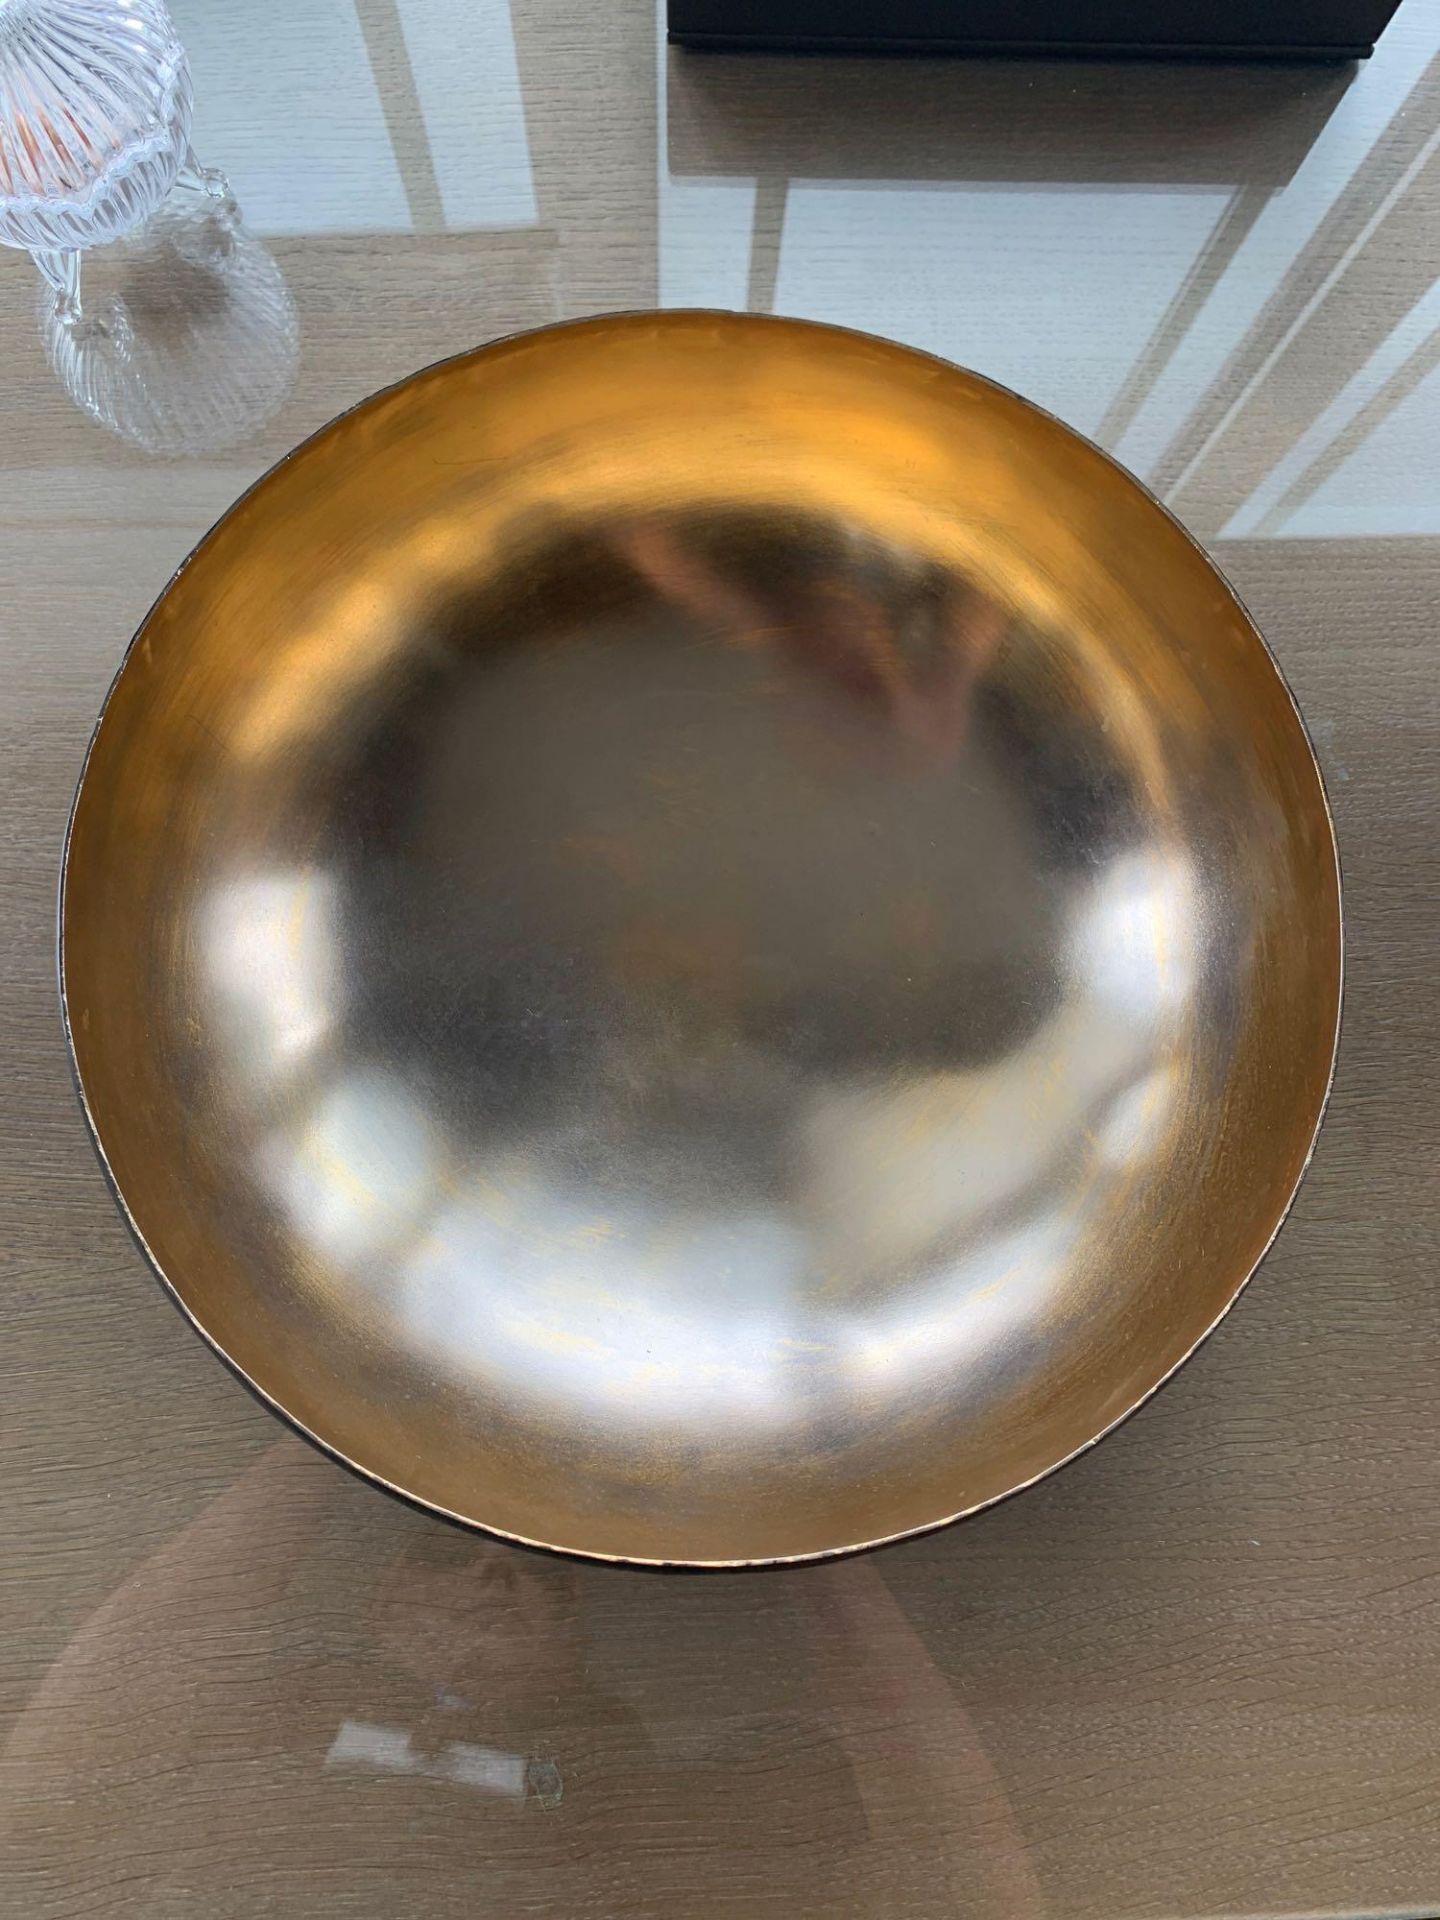 Michael Aram Sona Copper Fruit Bowl With Gold And Bronze Inner And Small Detachable Base 32cm - Image 2 of 2